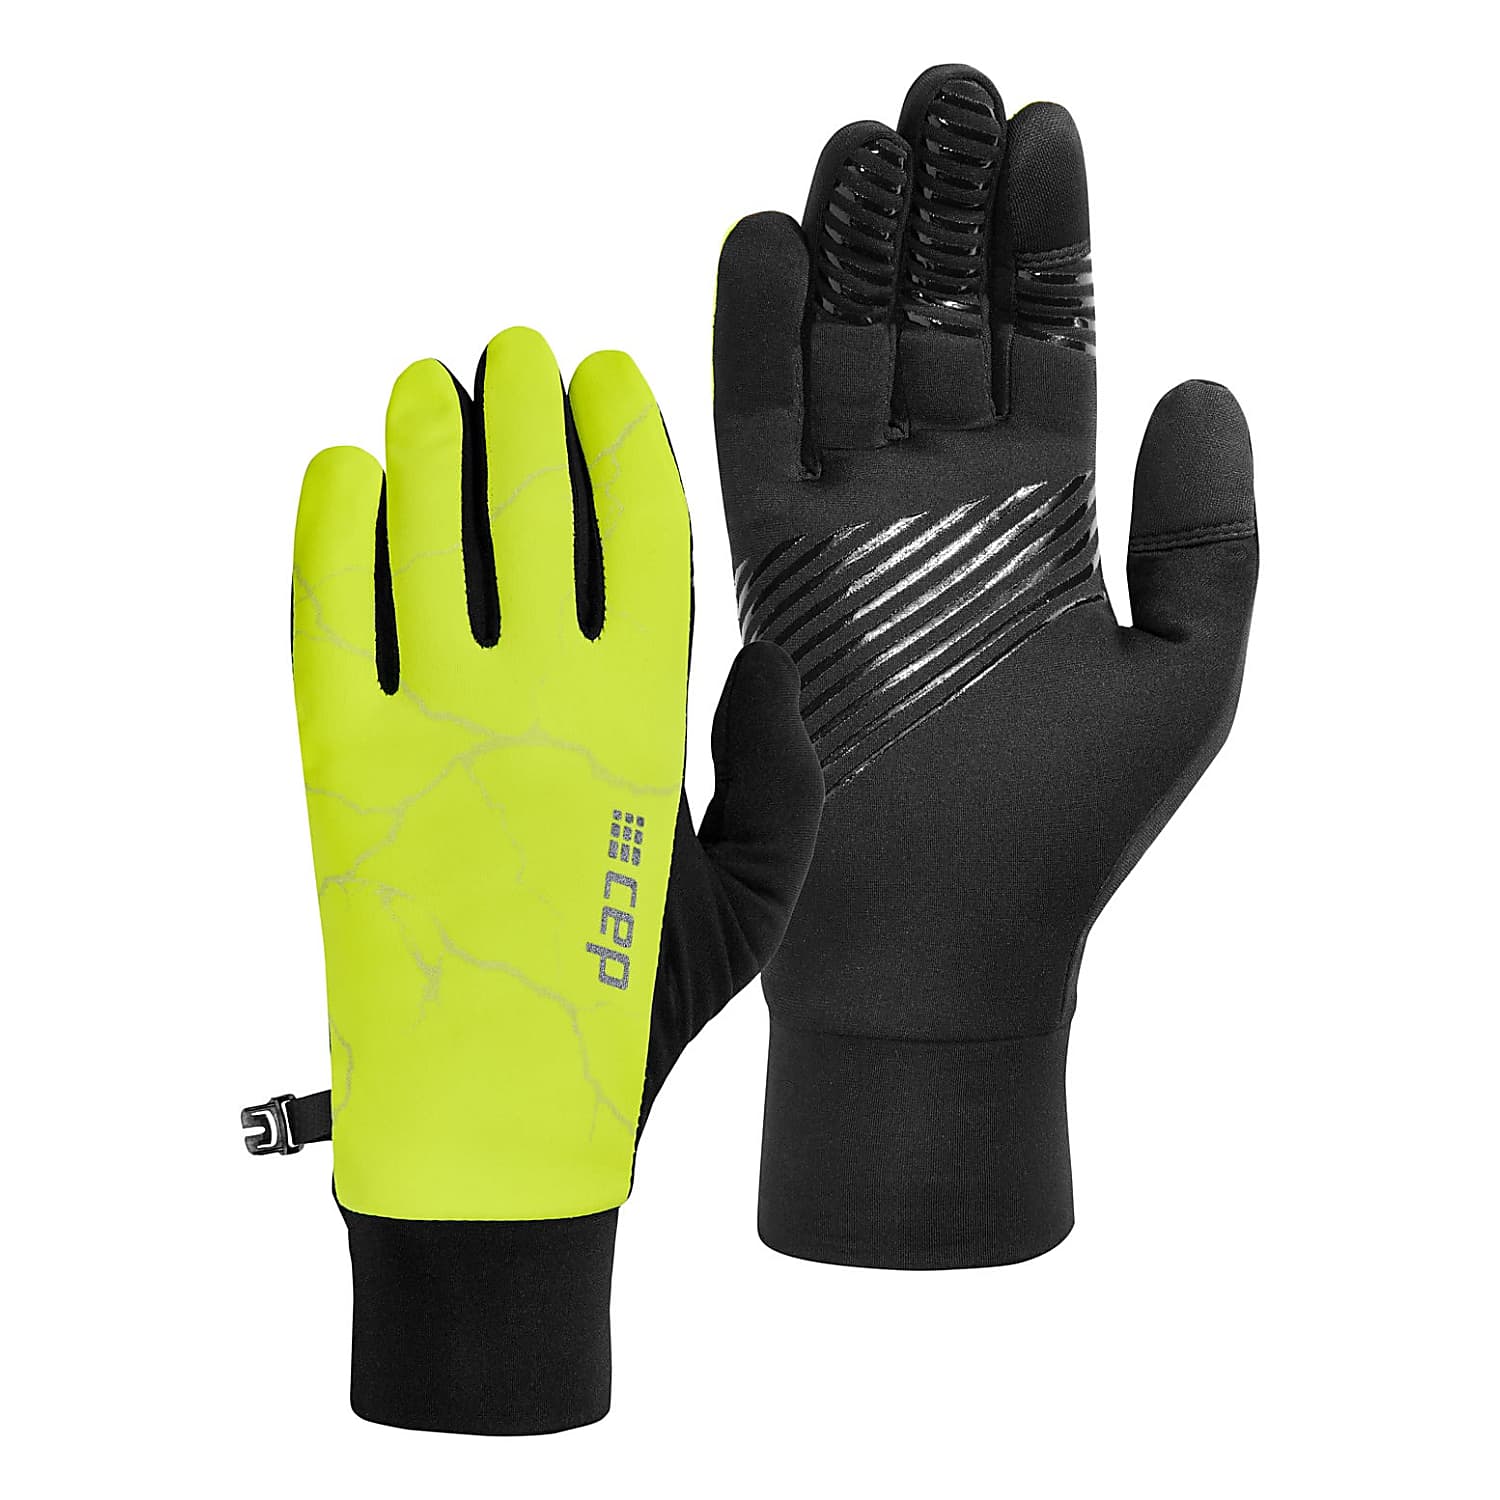 Buy CEP REFLECTIVE GLOVES, Black - Neon Yellow online now - www